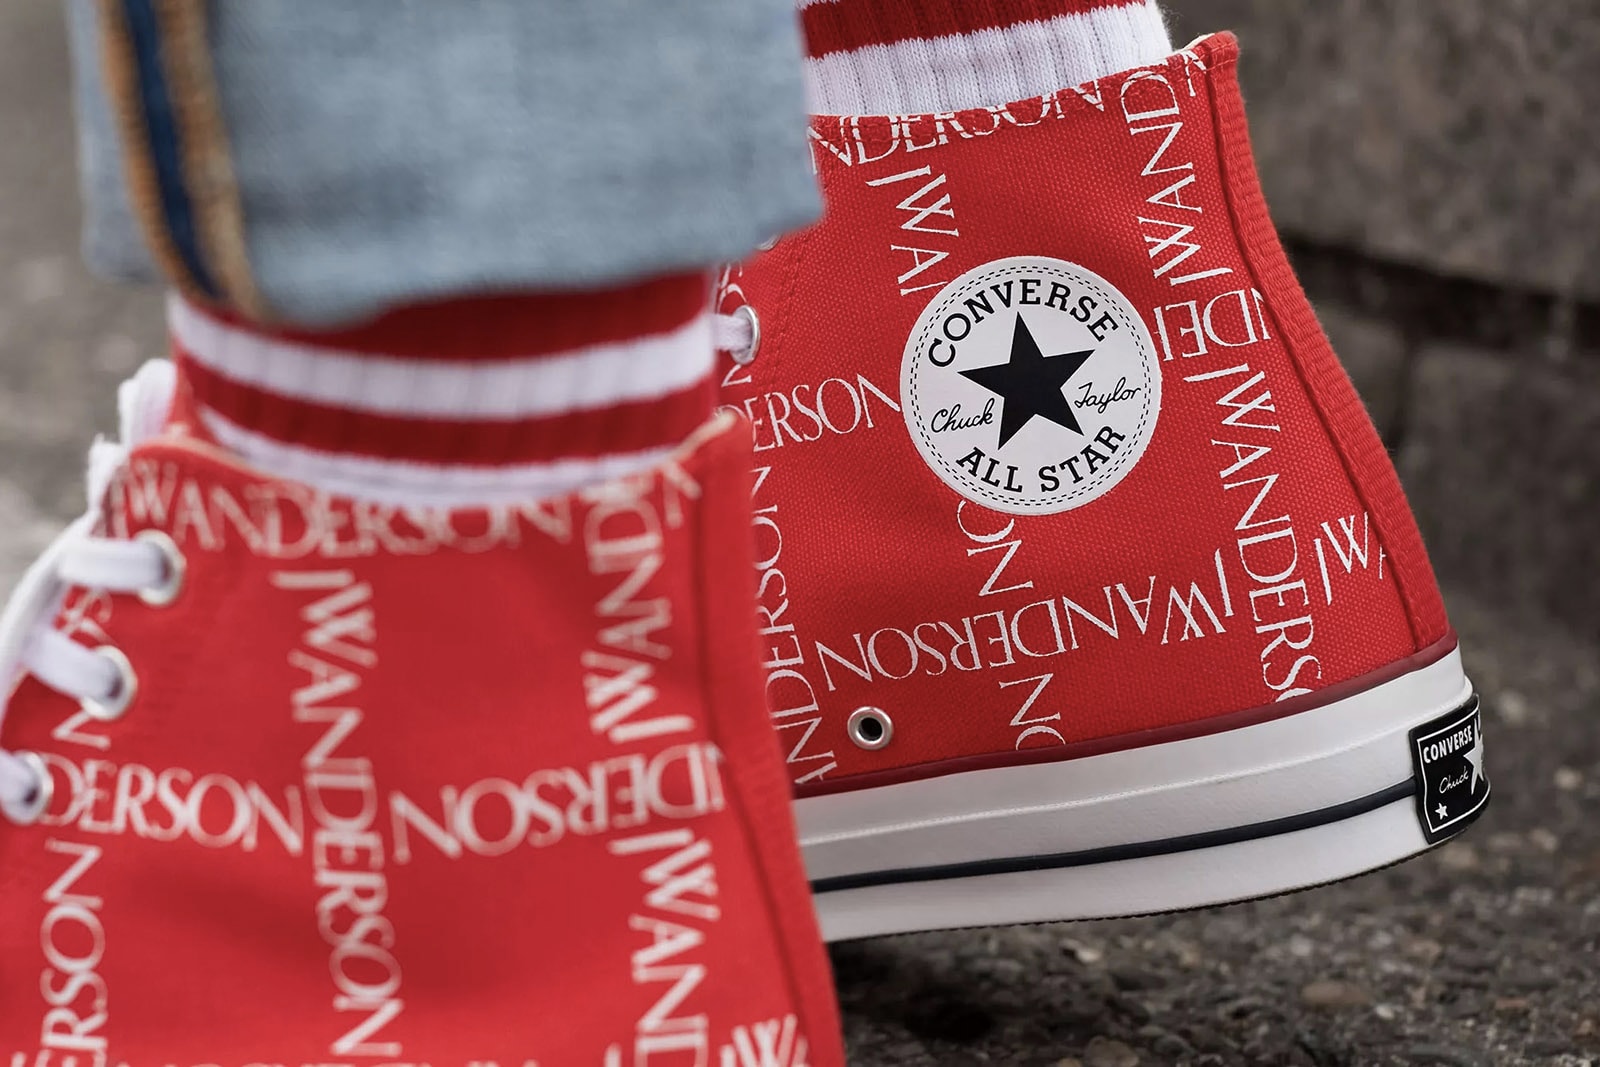 Converse x J.W. Anderson Chuck Taylor 70s Scarlet/White Closer Look Release Details Buy Cop Purchase Available Soon Sneakers Kicks Trainers Shoes Footwear